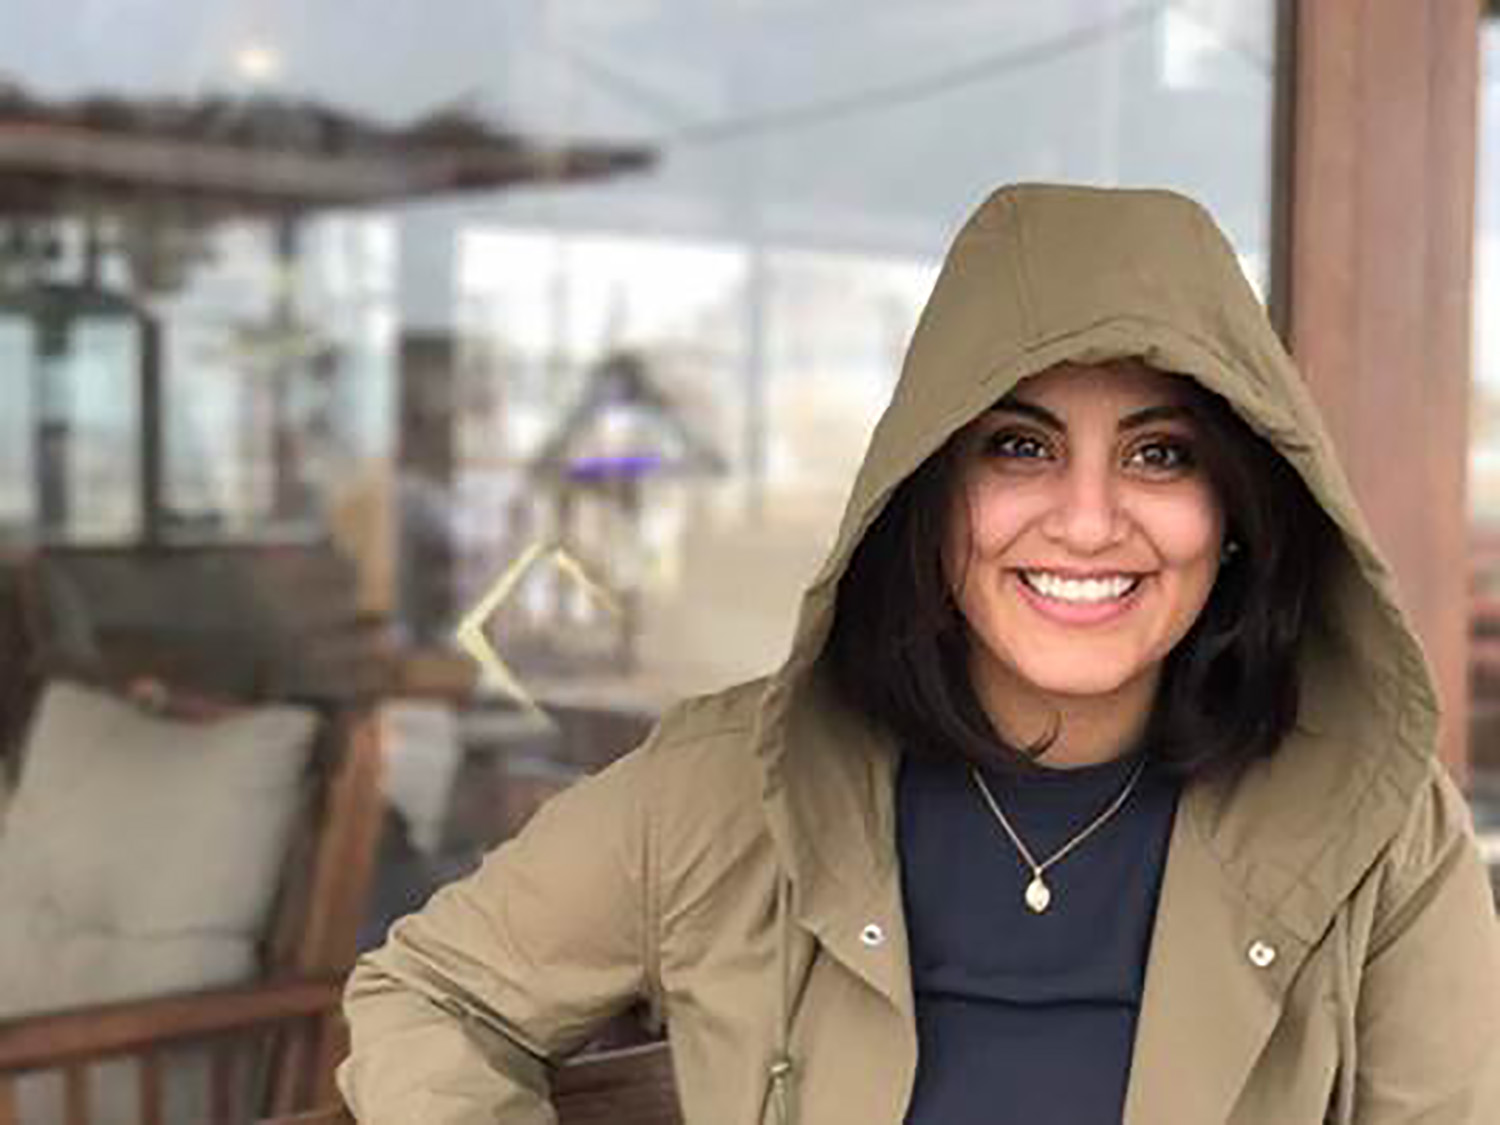 This undated handout picture released on the Facebook page of Saudi activist Loujain al-Hathloul shows her posing for the camera. (AFP via Getty Images)